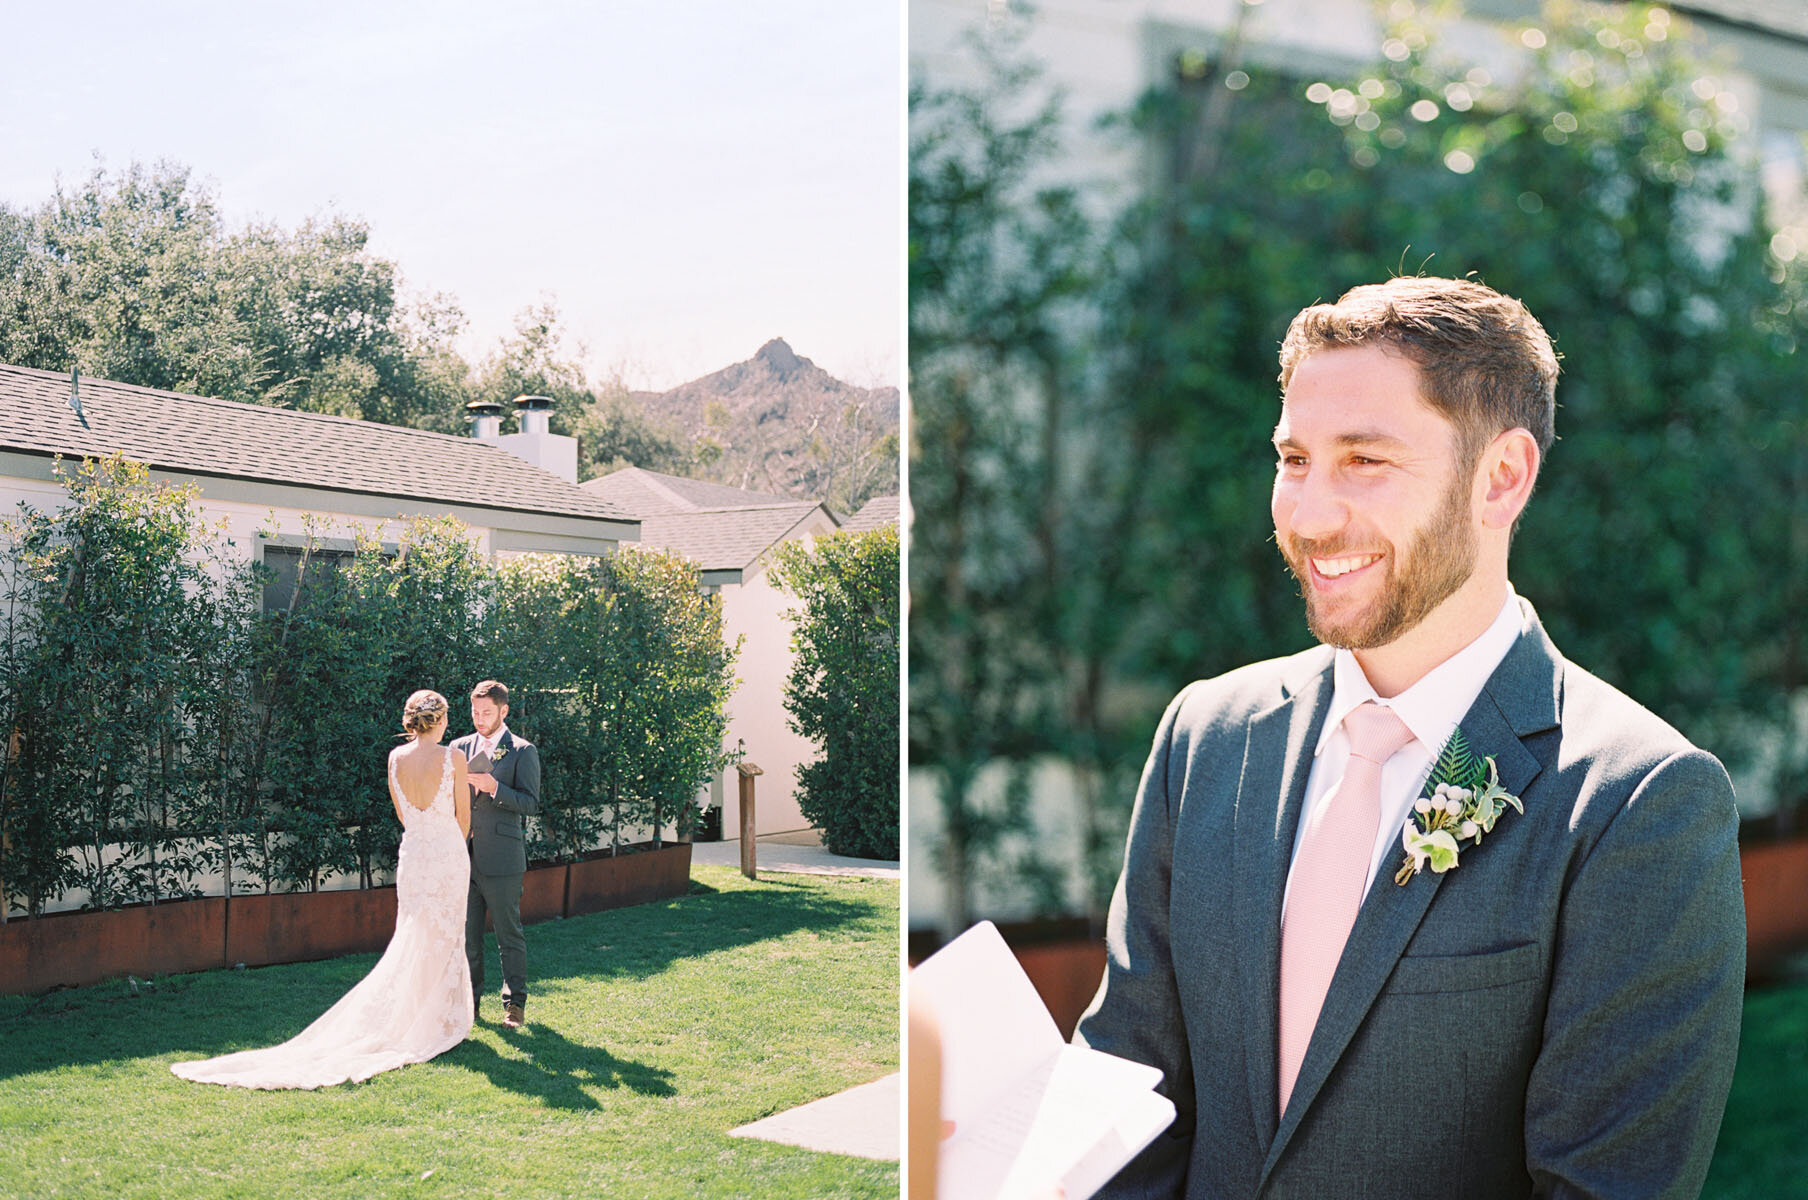 Calamigos Ranch Wedding - bride and groom during their first look